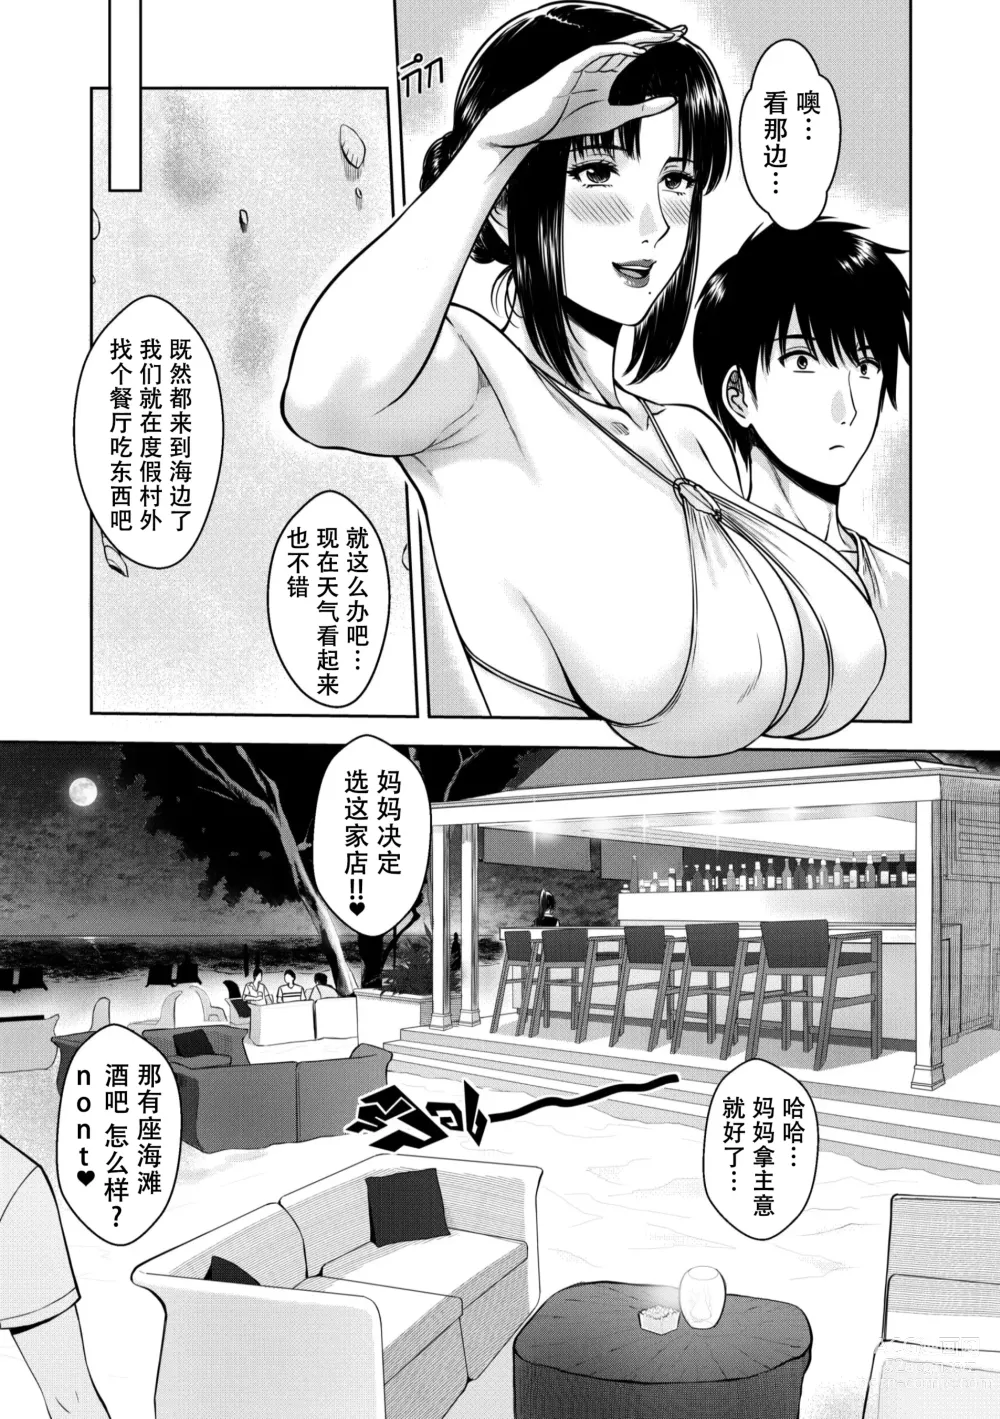 Page 14 of doujinshi My Mother (decensored)